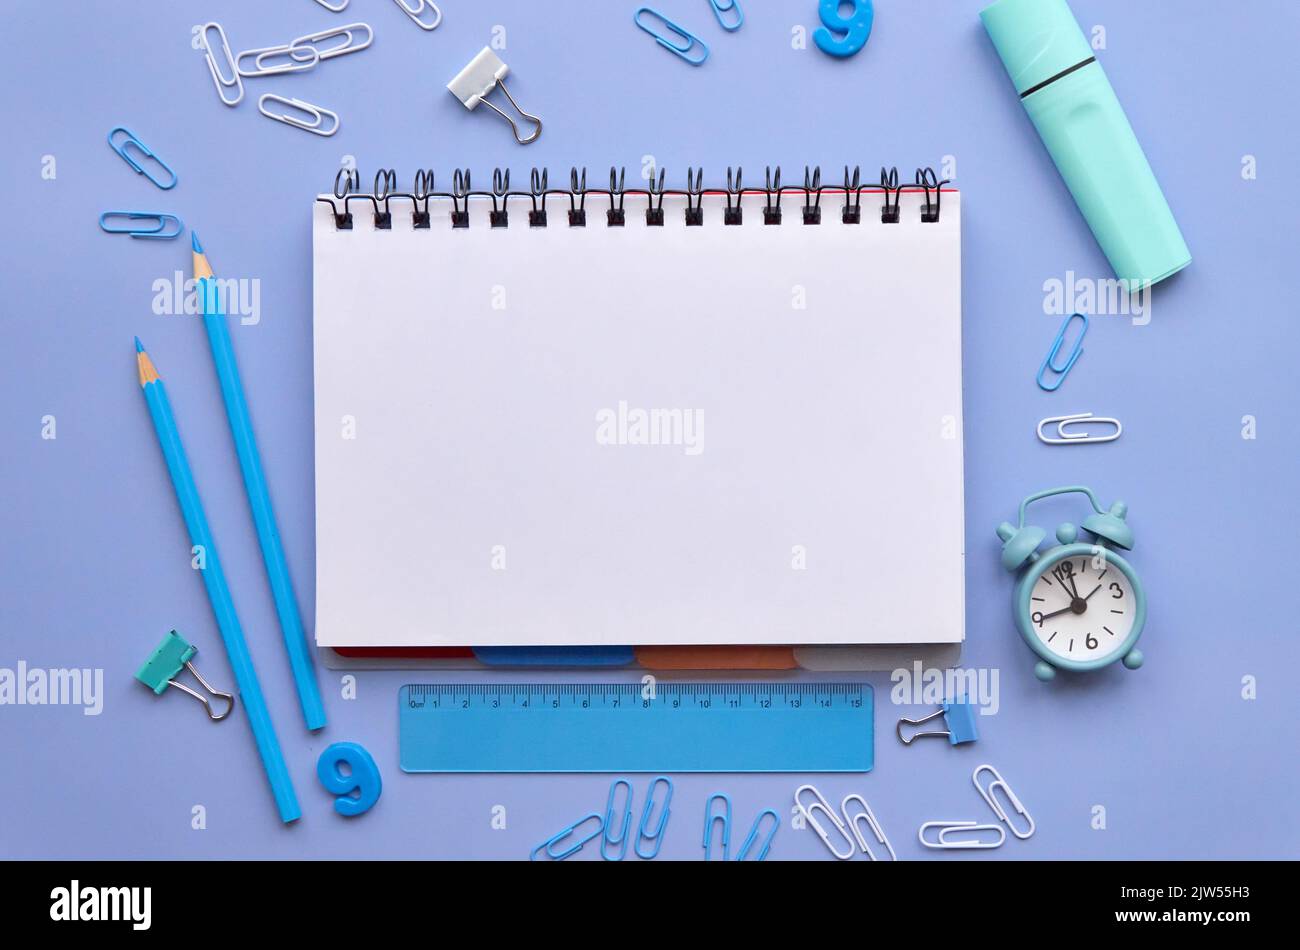 School stationery and open notebook on pastel lavender background, flatlay. Stock Photo